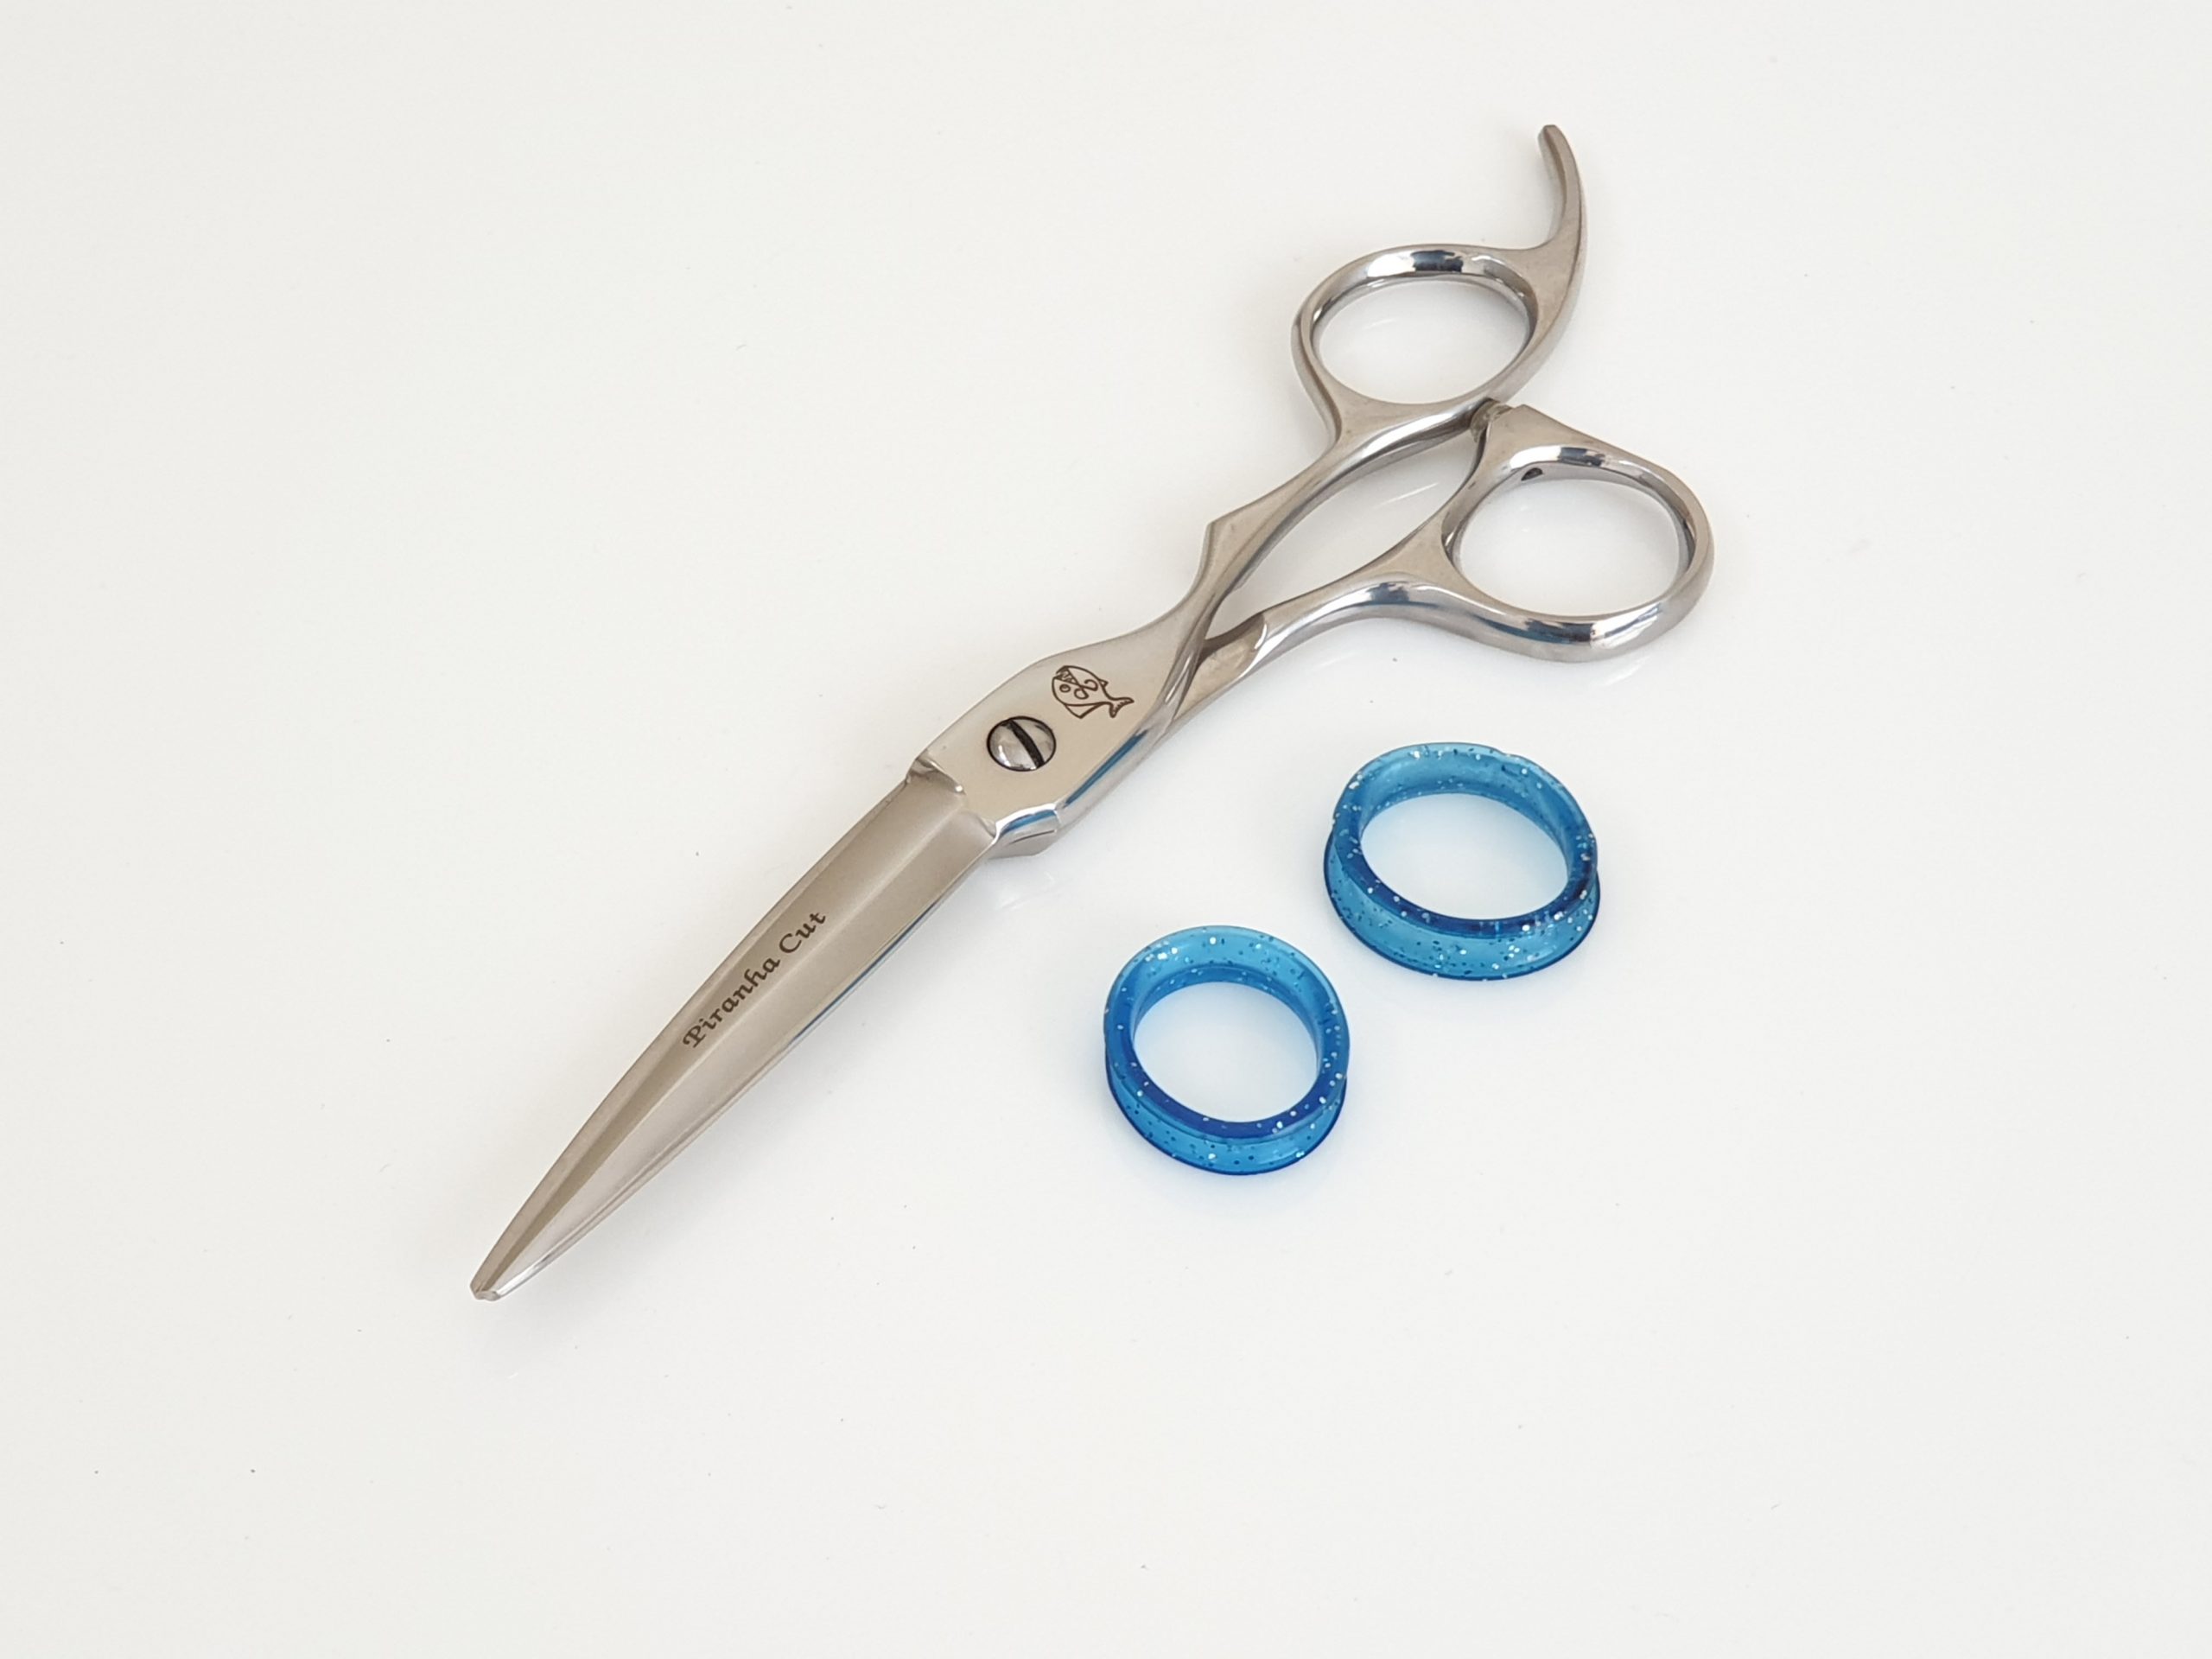 Ultimate Guide to Buy a Hairdressing Scissors in 2022